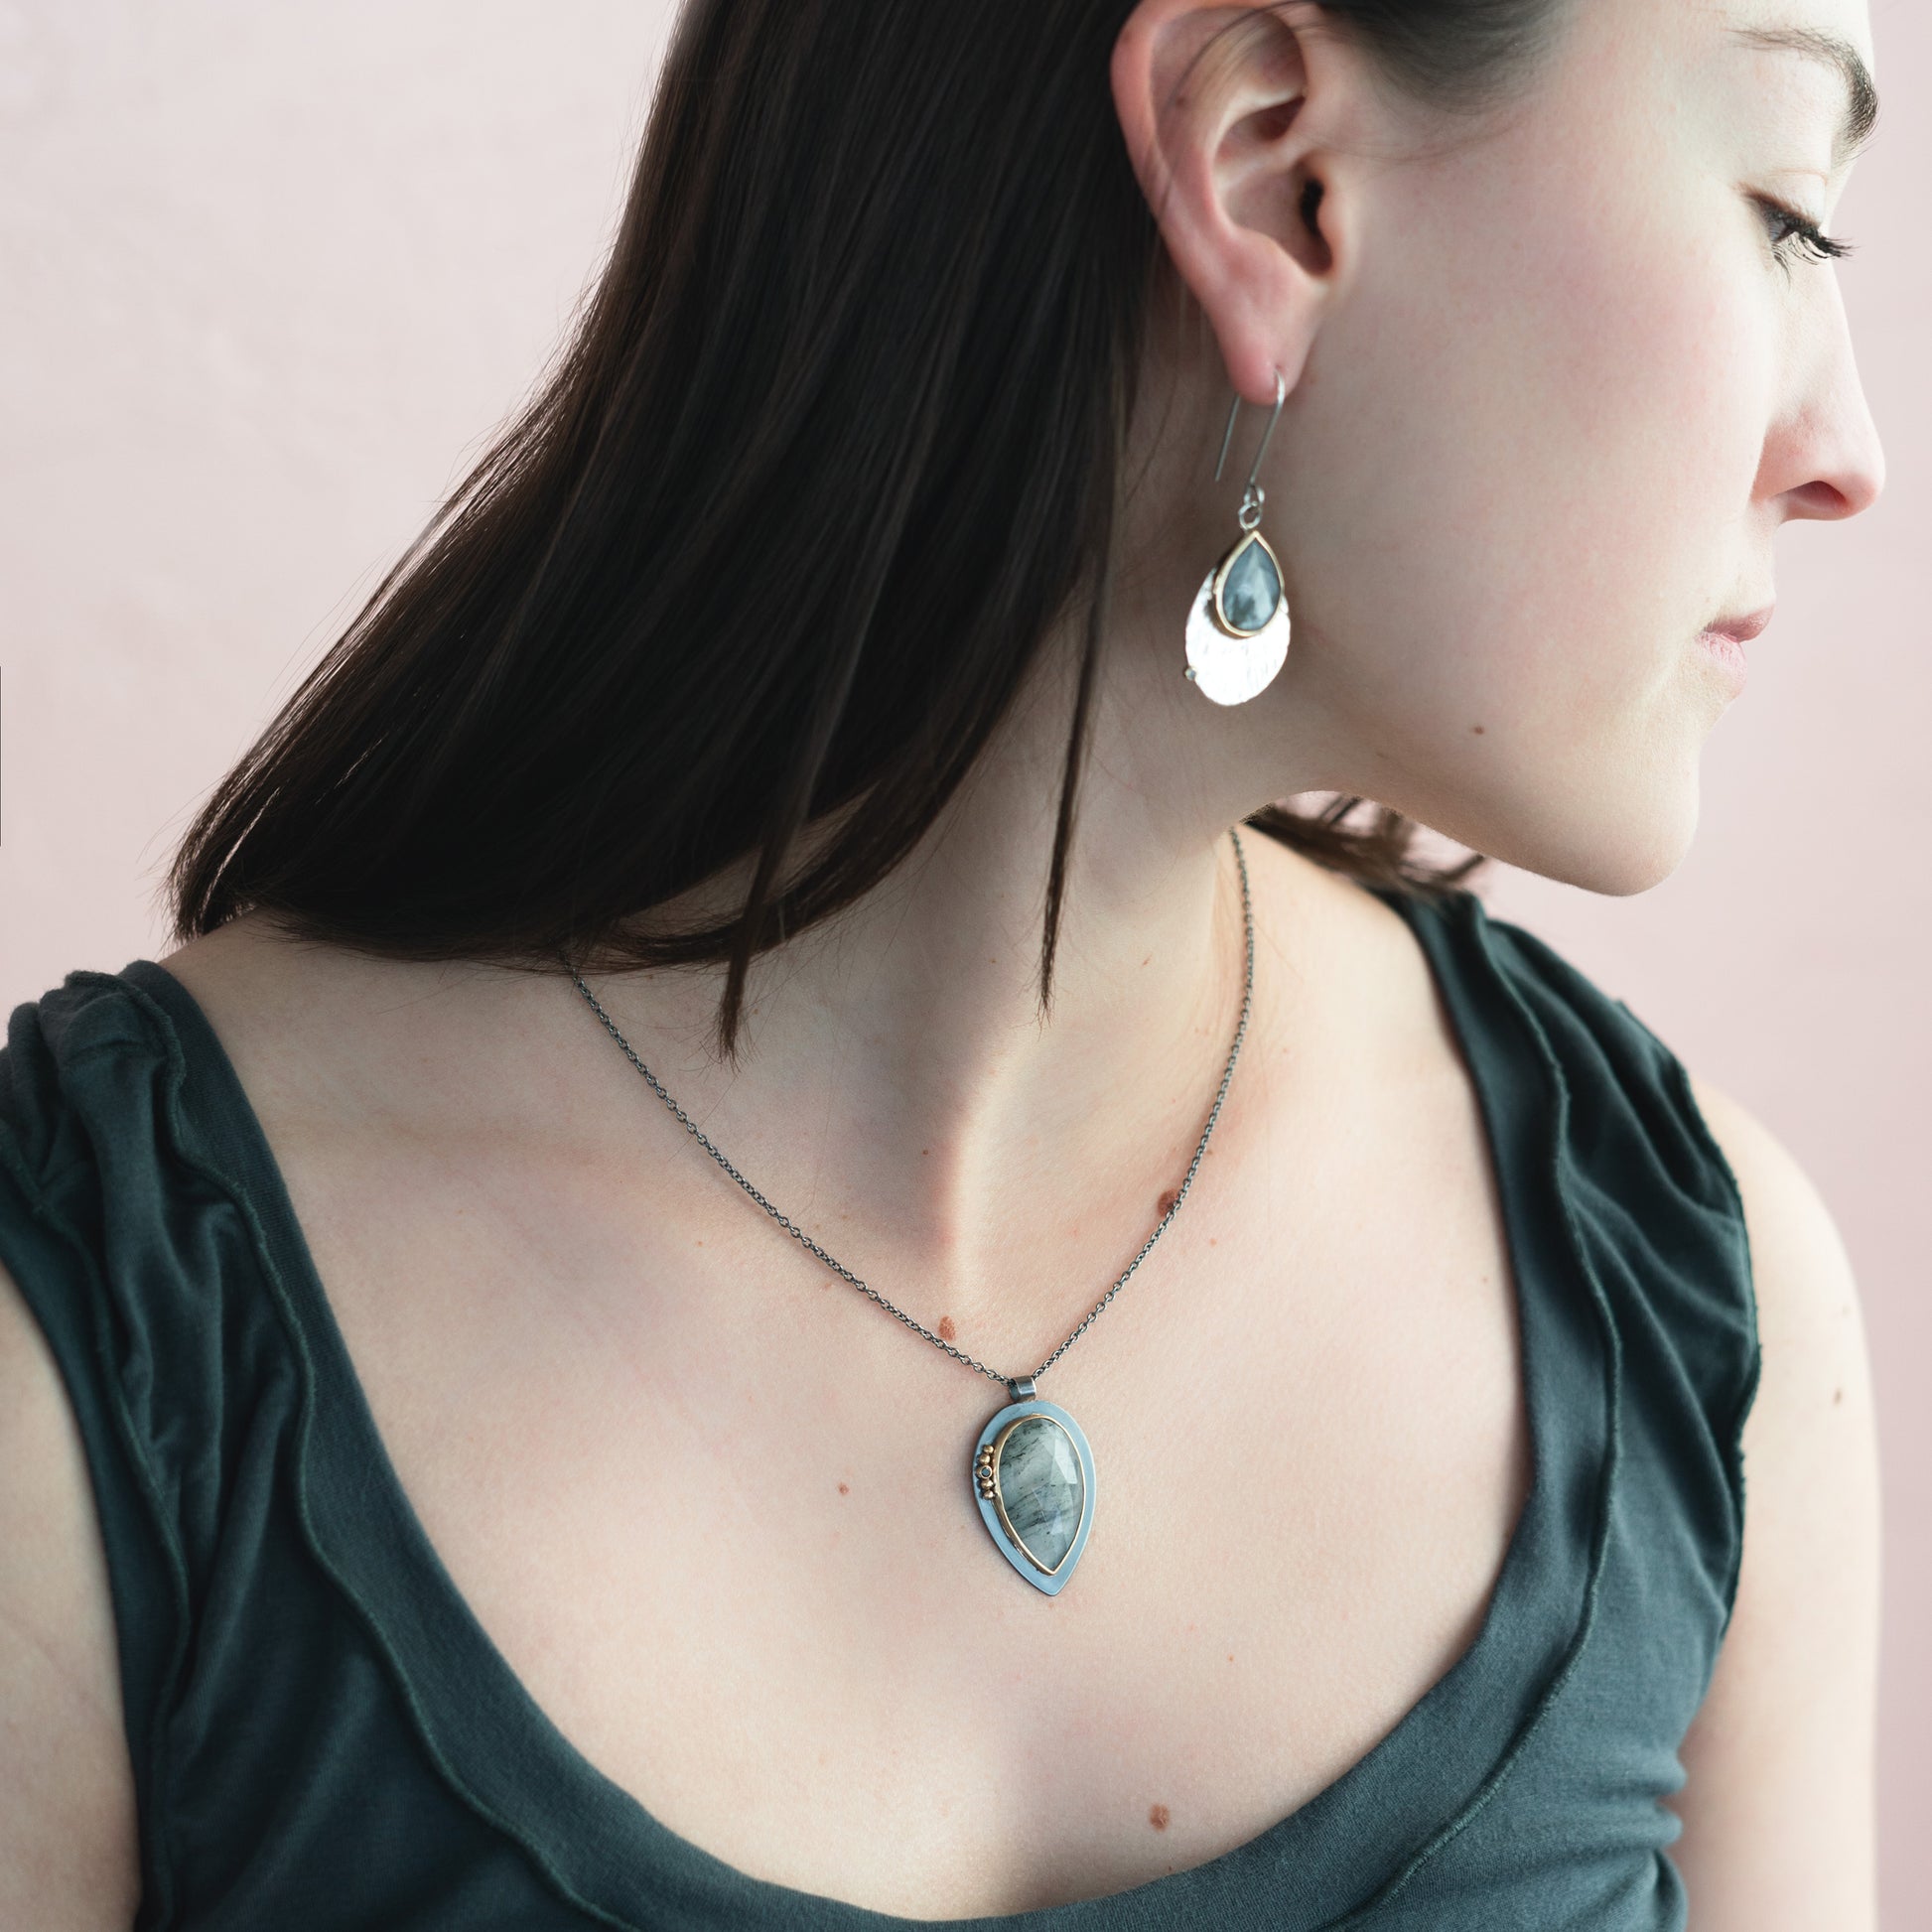 lady wearing dark metal pendant with rose cut center stone on long chain